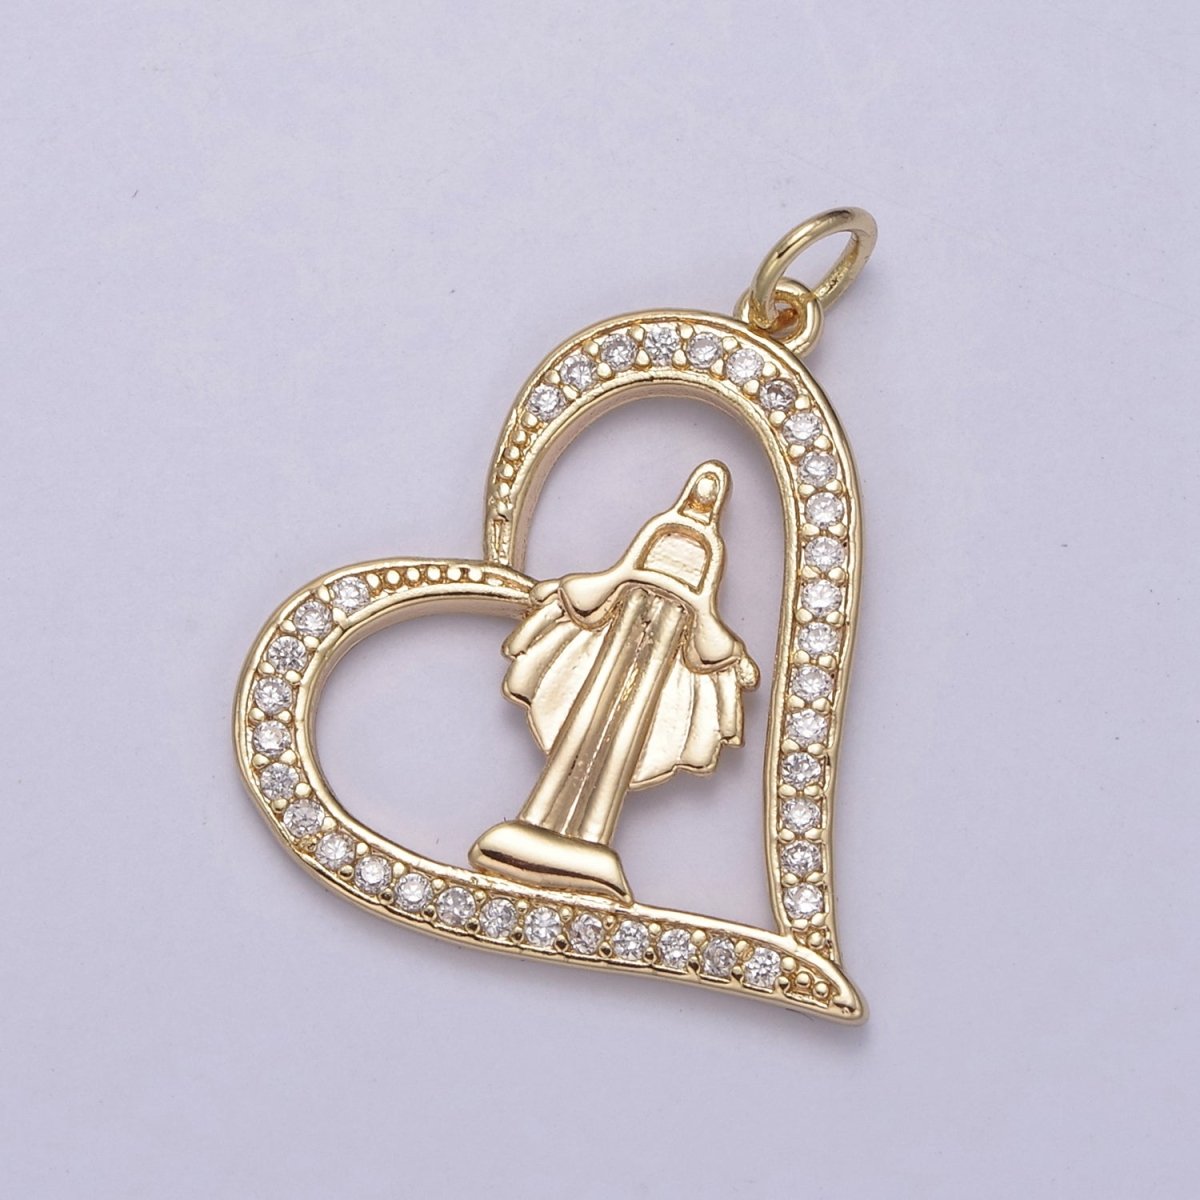 Micro Pave Heart Women's Virgin Mary de Guadalupe Miraculous Lady Religious Jewelry Supply Making for Bracelet Necklace N-707 - DLUXCA